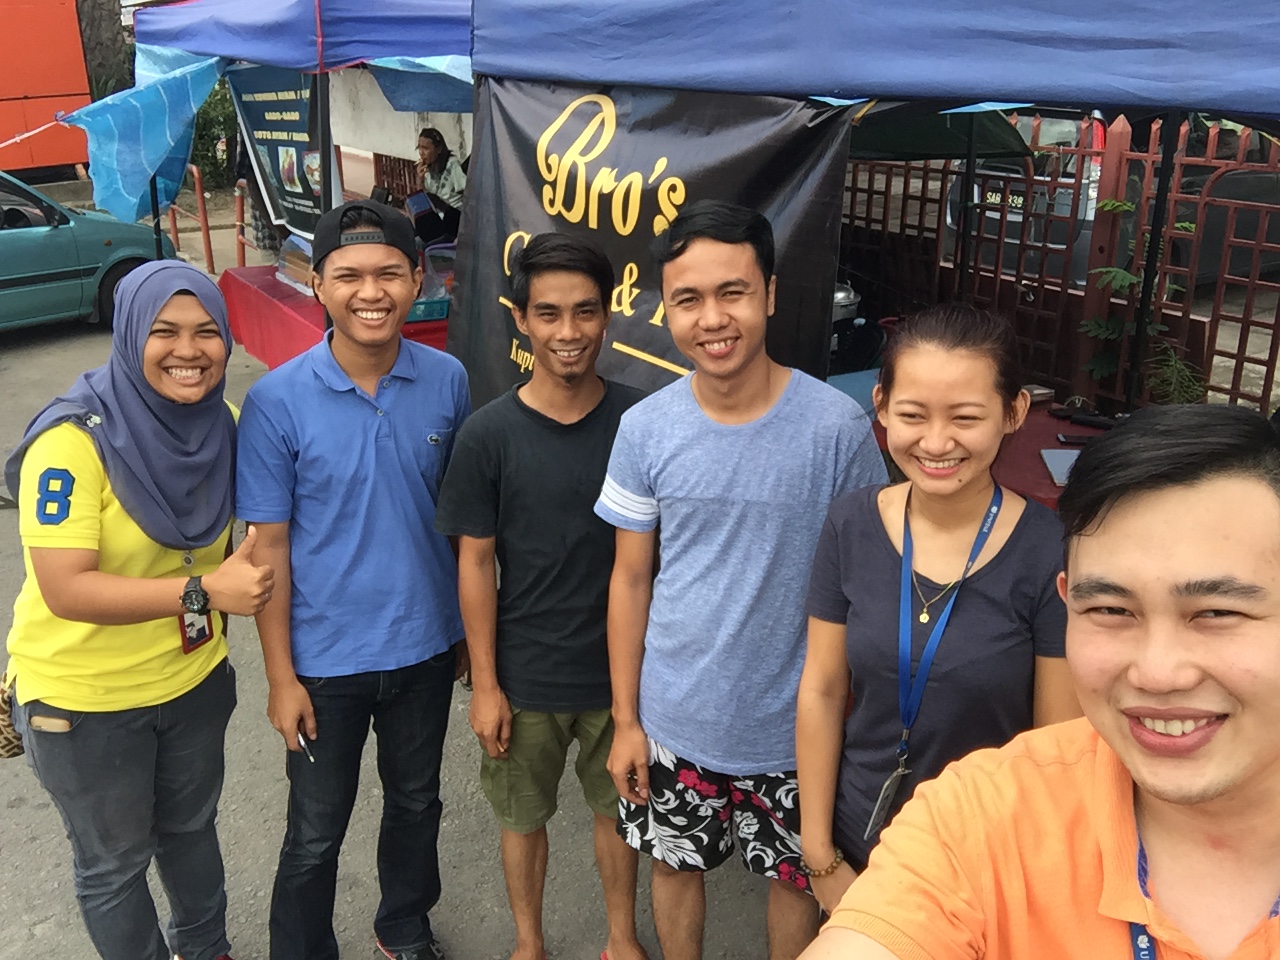 Our group picture with owner of the stall